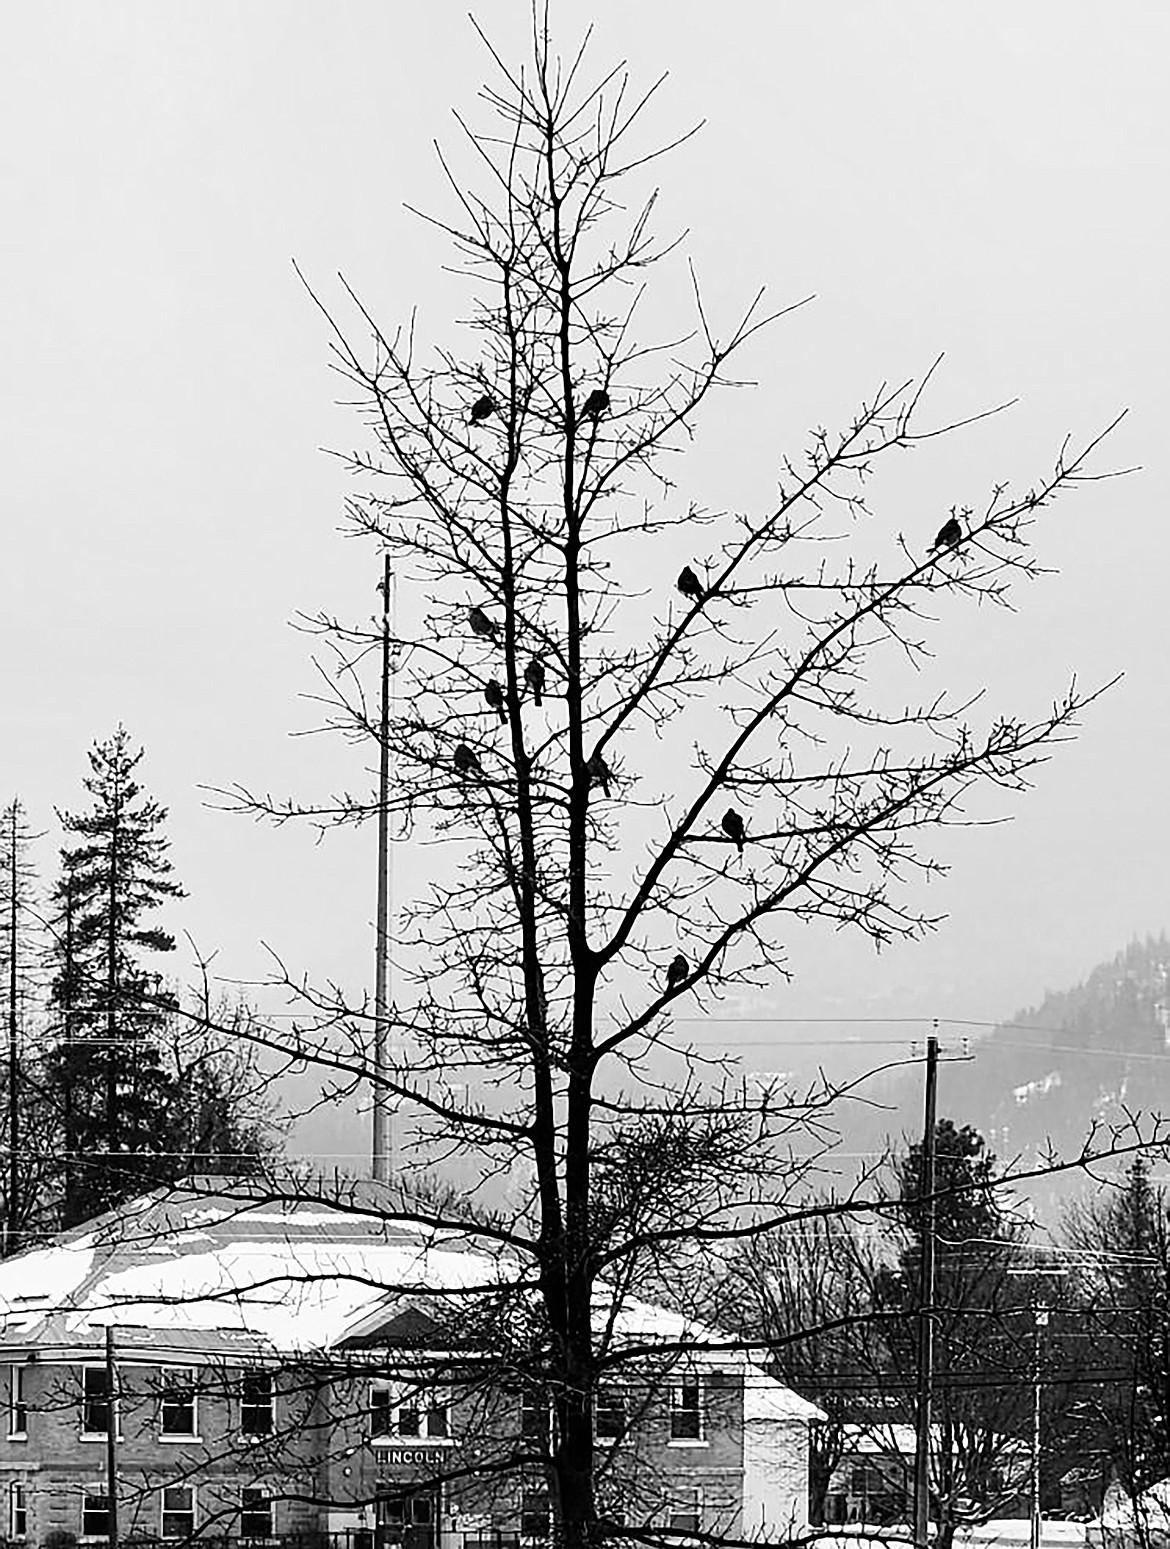 Joan Taylor shared this Best Shot of robins roosting in a tree near Lake Pend Oreille High School after a recent snowstorm. If you have a photo that you took that you would like to see run as a Best Shot or I Took The Bee send it to the Bonner County Daily Bee, P.O. Box 159, Sandpoint, Idaho, 83864; or drop them off at 310 Church St., Sandpoint. You may also email your pictures to the Bonner County Daily Bee along with your name, caption information, hometown, and phone number to news@bonnercountydailybee.com.